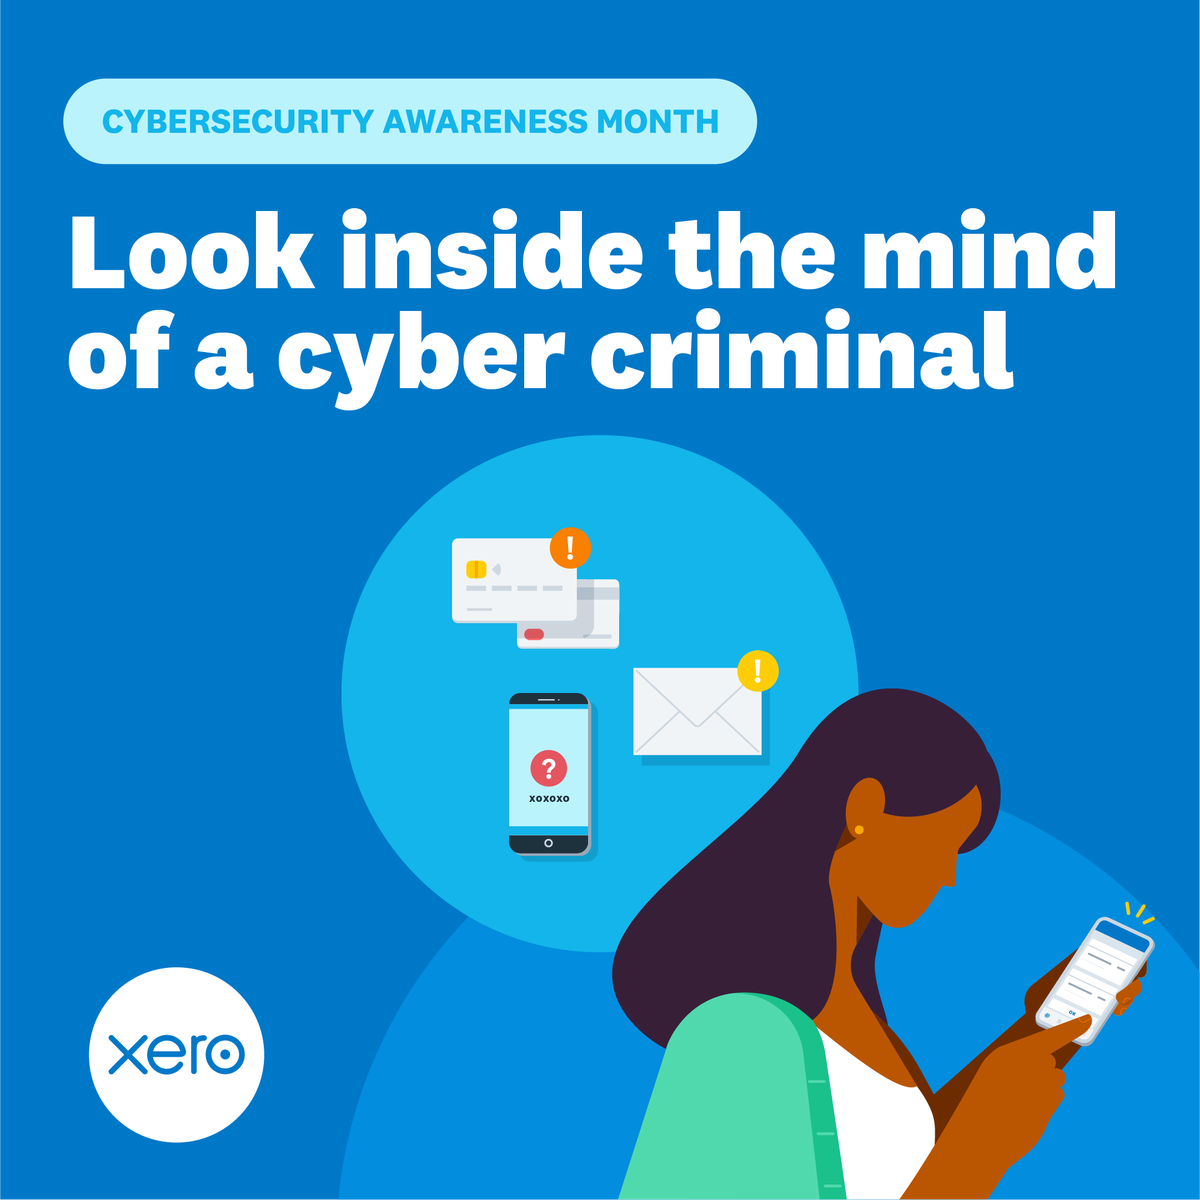 This #Cybersecurity Awareness Month, we’re helping you get inside the mindset of a cyber criminal, so you can keep your data safe. Protect your business 👉 bit.ly/3rItrNQ #CyberSecMonth #BeCyberSmart